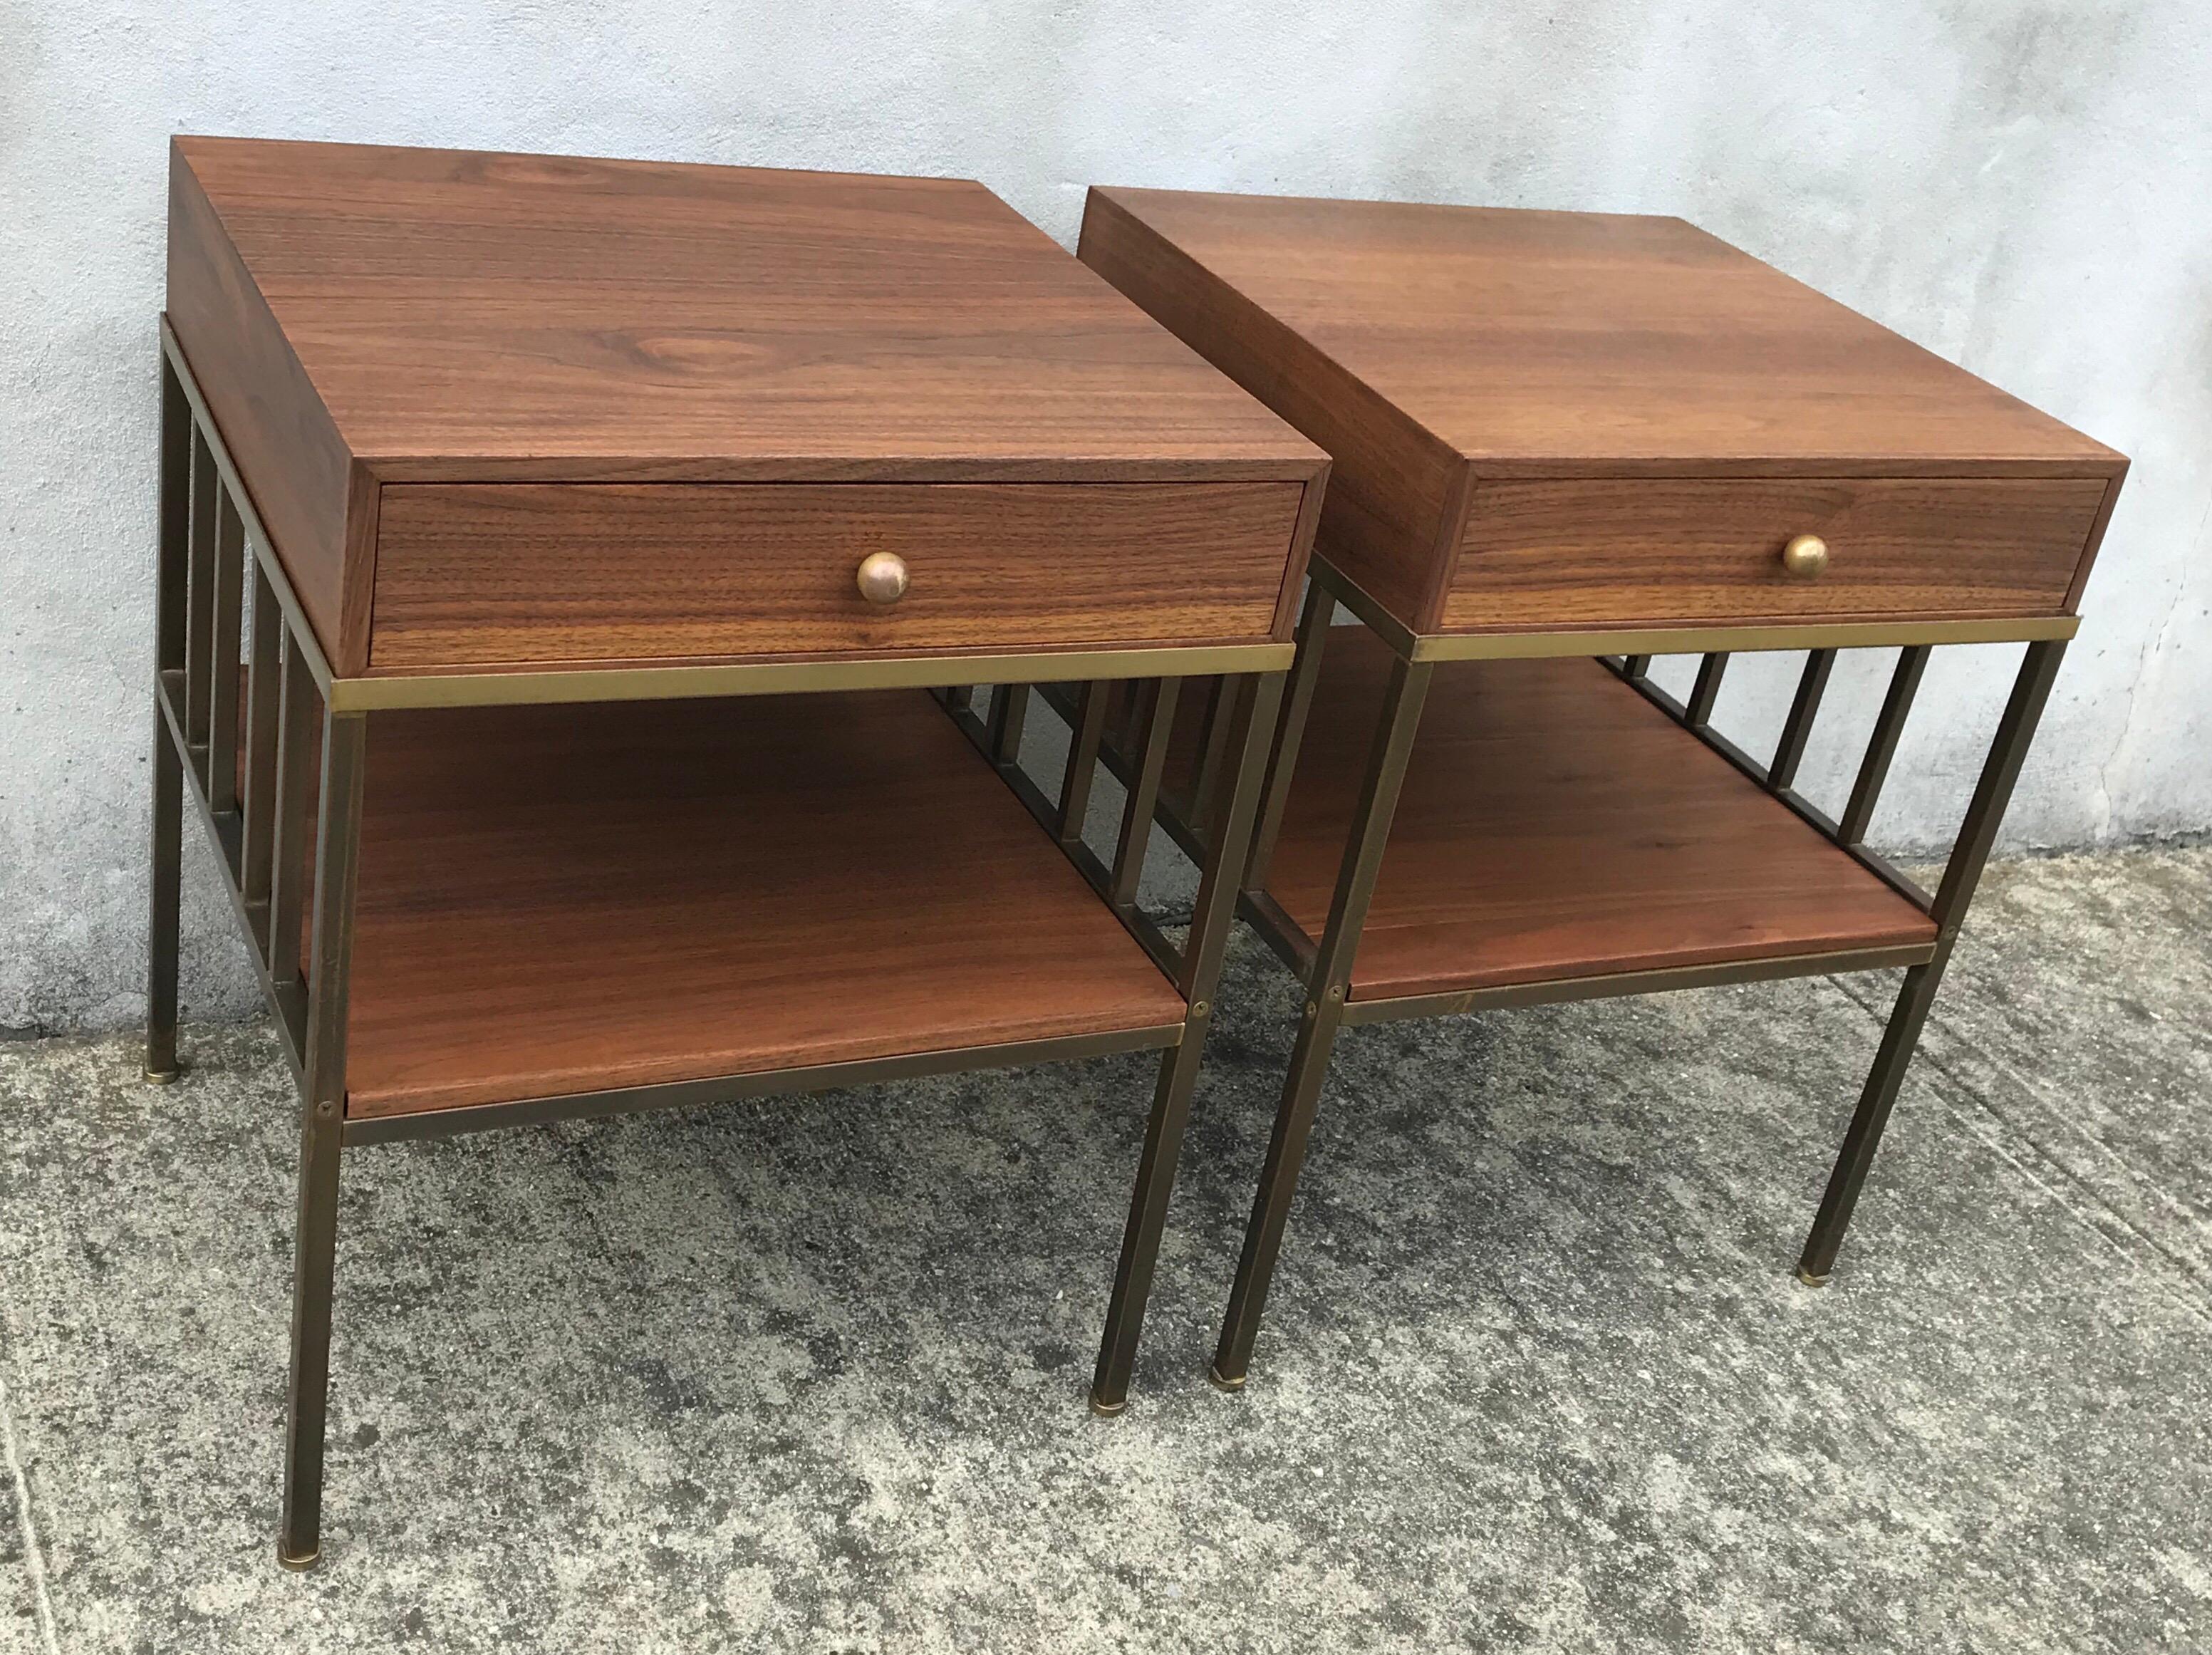 Amazing pair of nightstands or side tables by Paul McCobb for Directional, rare very early production. Solid walnut cubes rest in beautiful patina brass frames. Professionally restored.